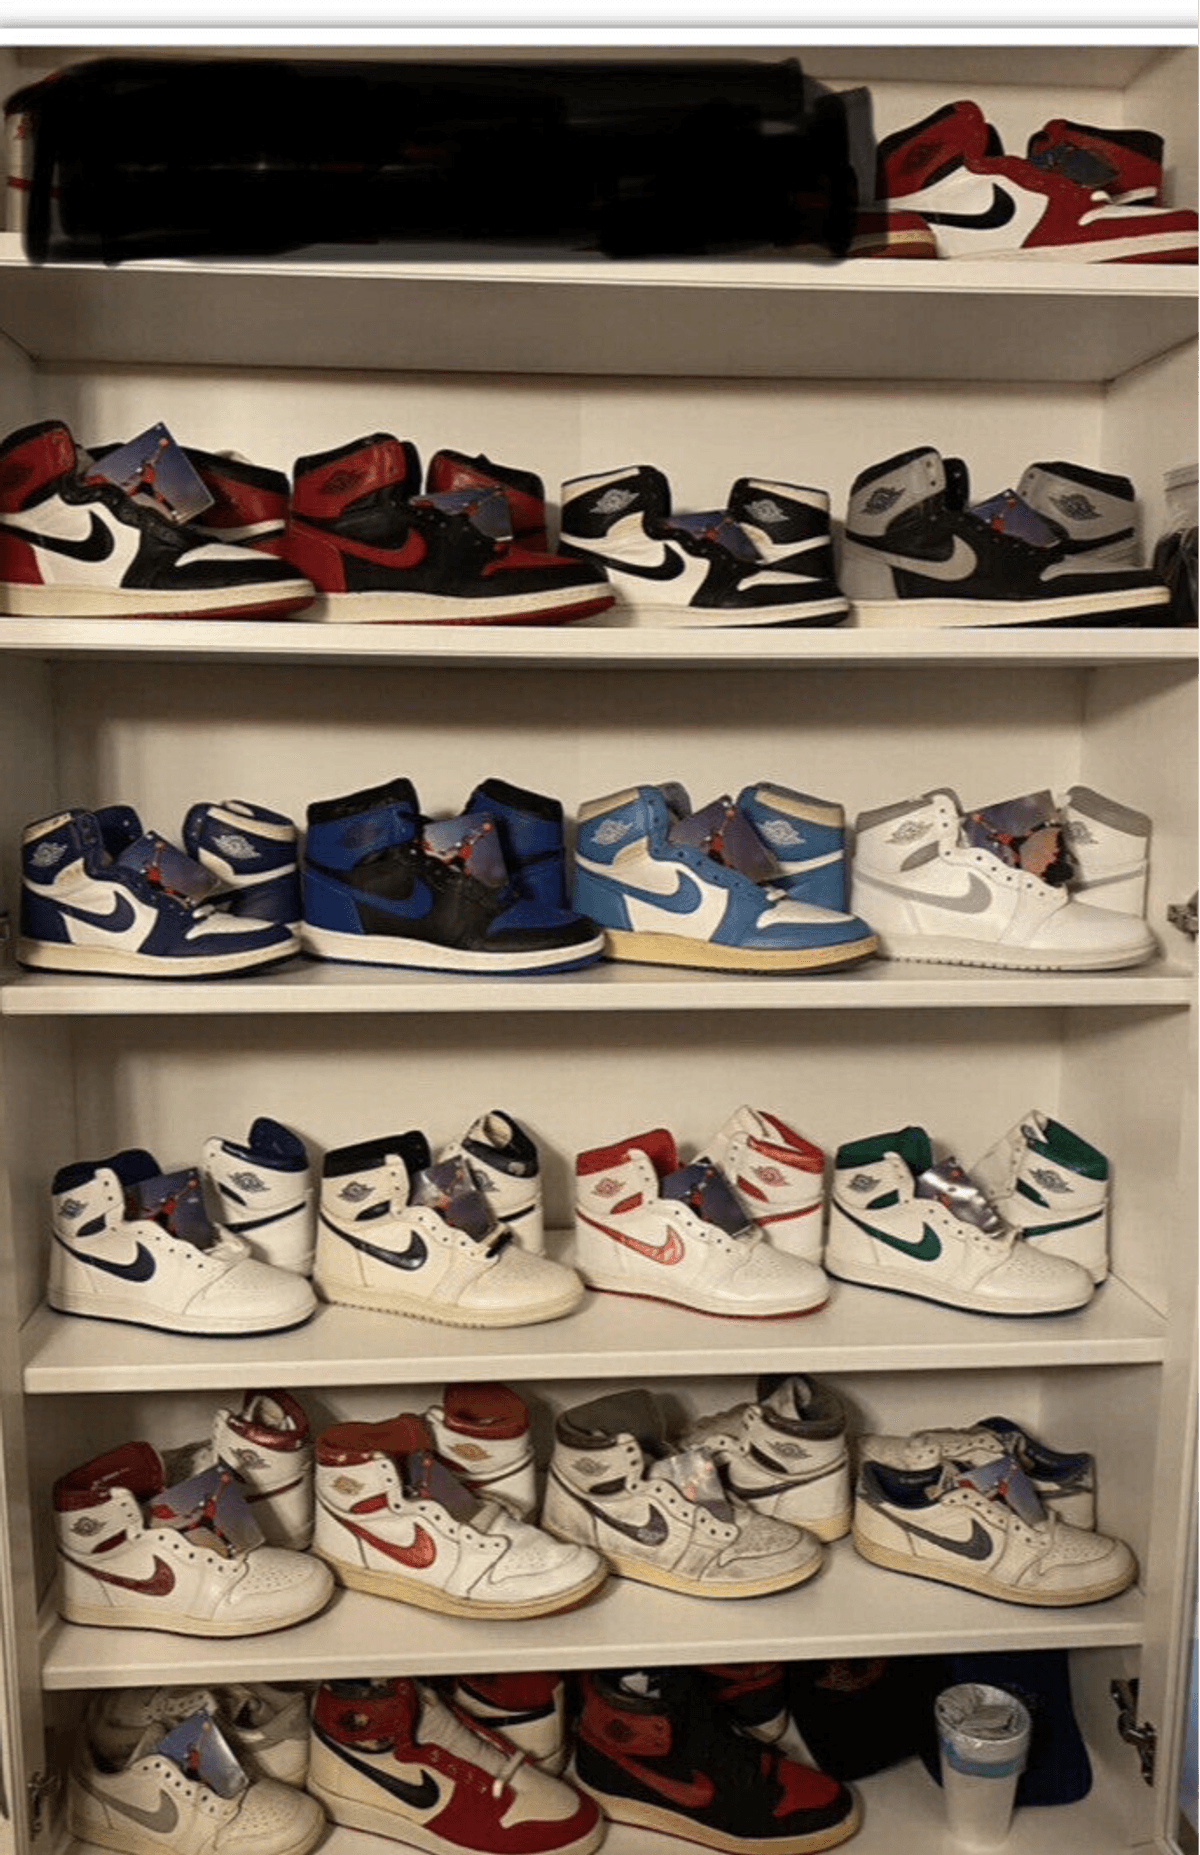 The Complete OG Air Jordan 1 Collection From 1985 Has Surfaced On eBay